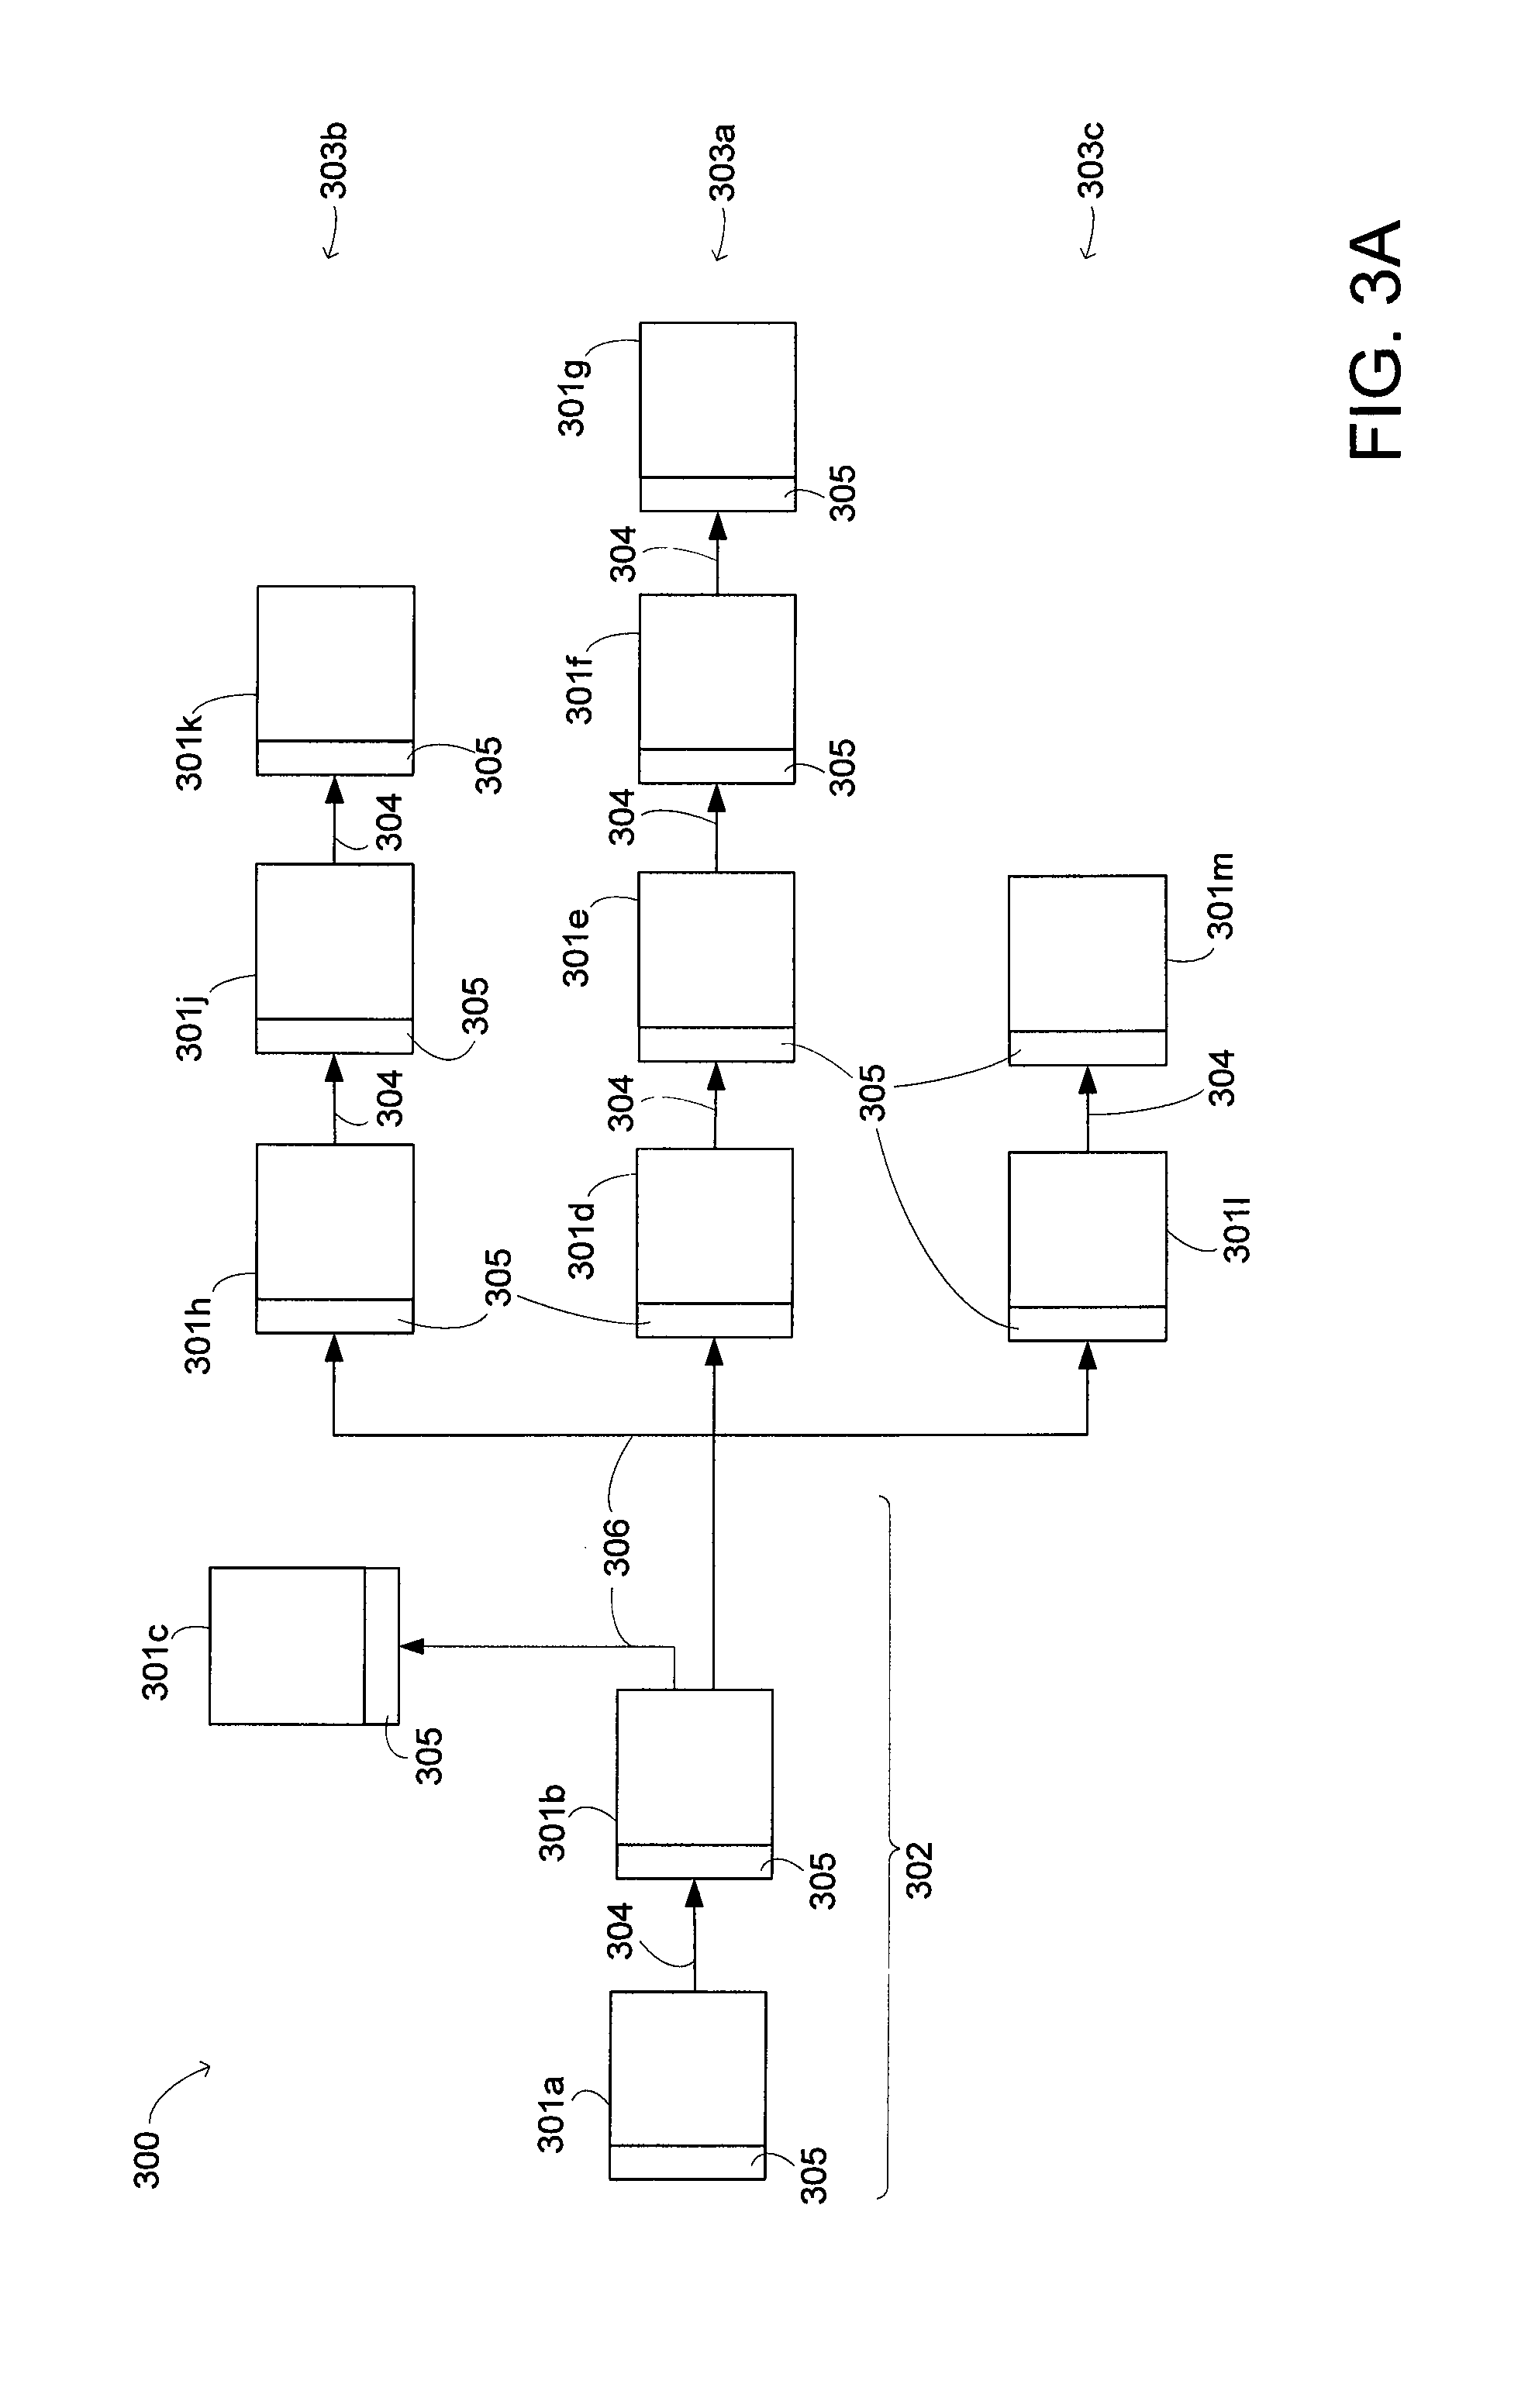 Method for generating a transport track through a software system landscape and computer system with a software system landscape and a transport track